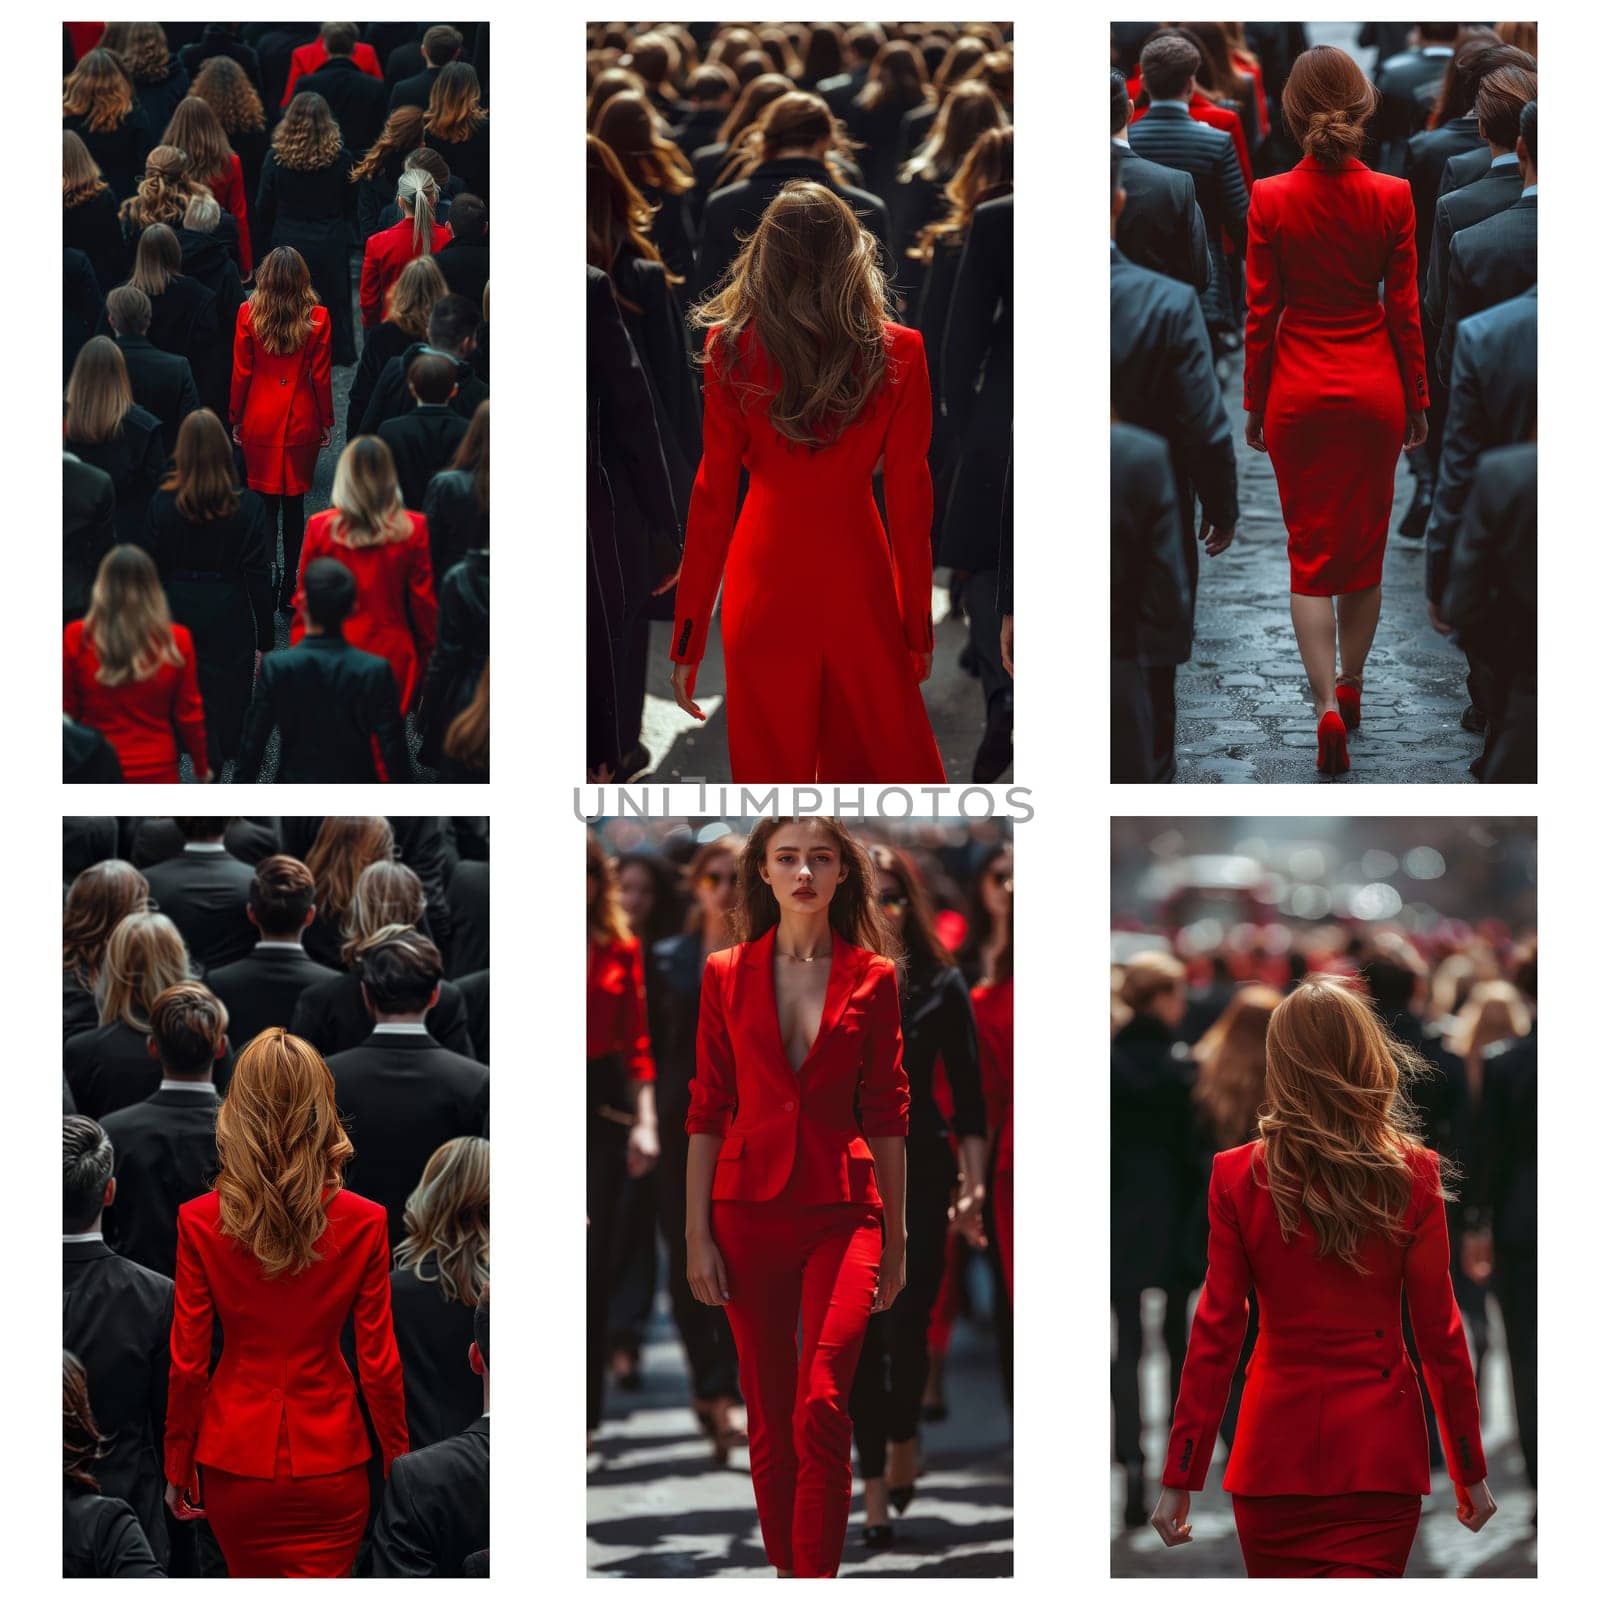 A woman in a red dress walks down a crowded street. The image is a collage of different shots of the woman in various poses and settings. Scene is one of elegance and sophistication